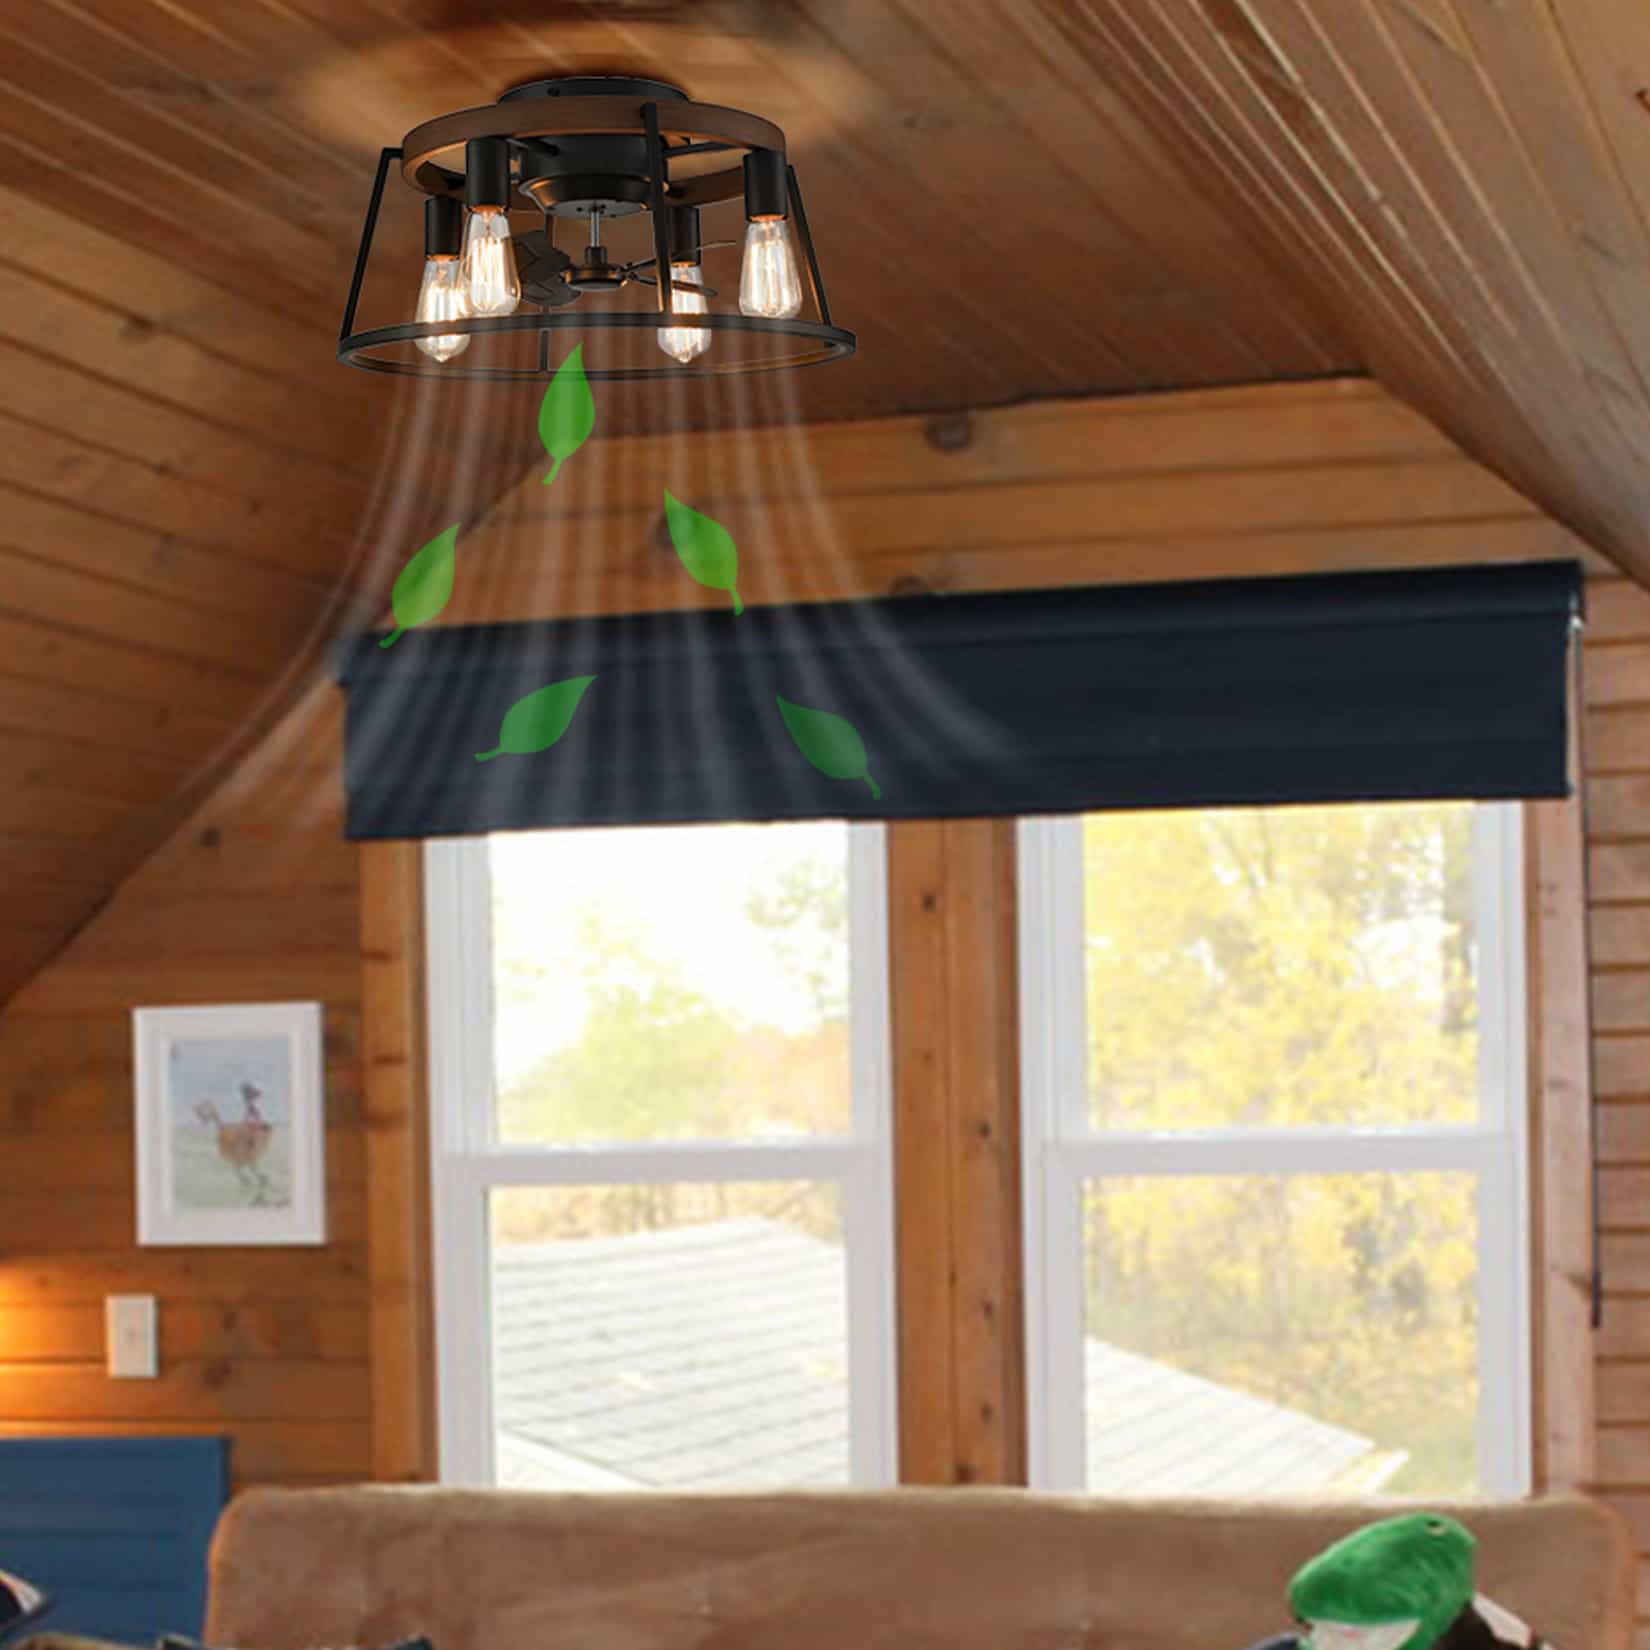 Farmhouse Caged Ceiling Fans with Lights Remote Control